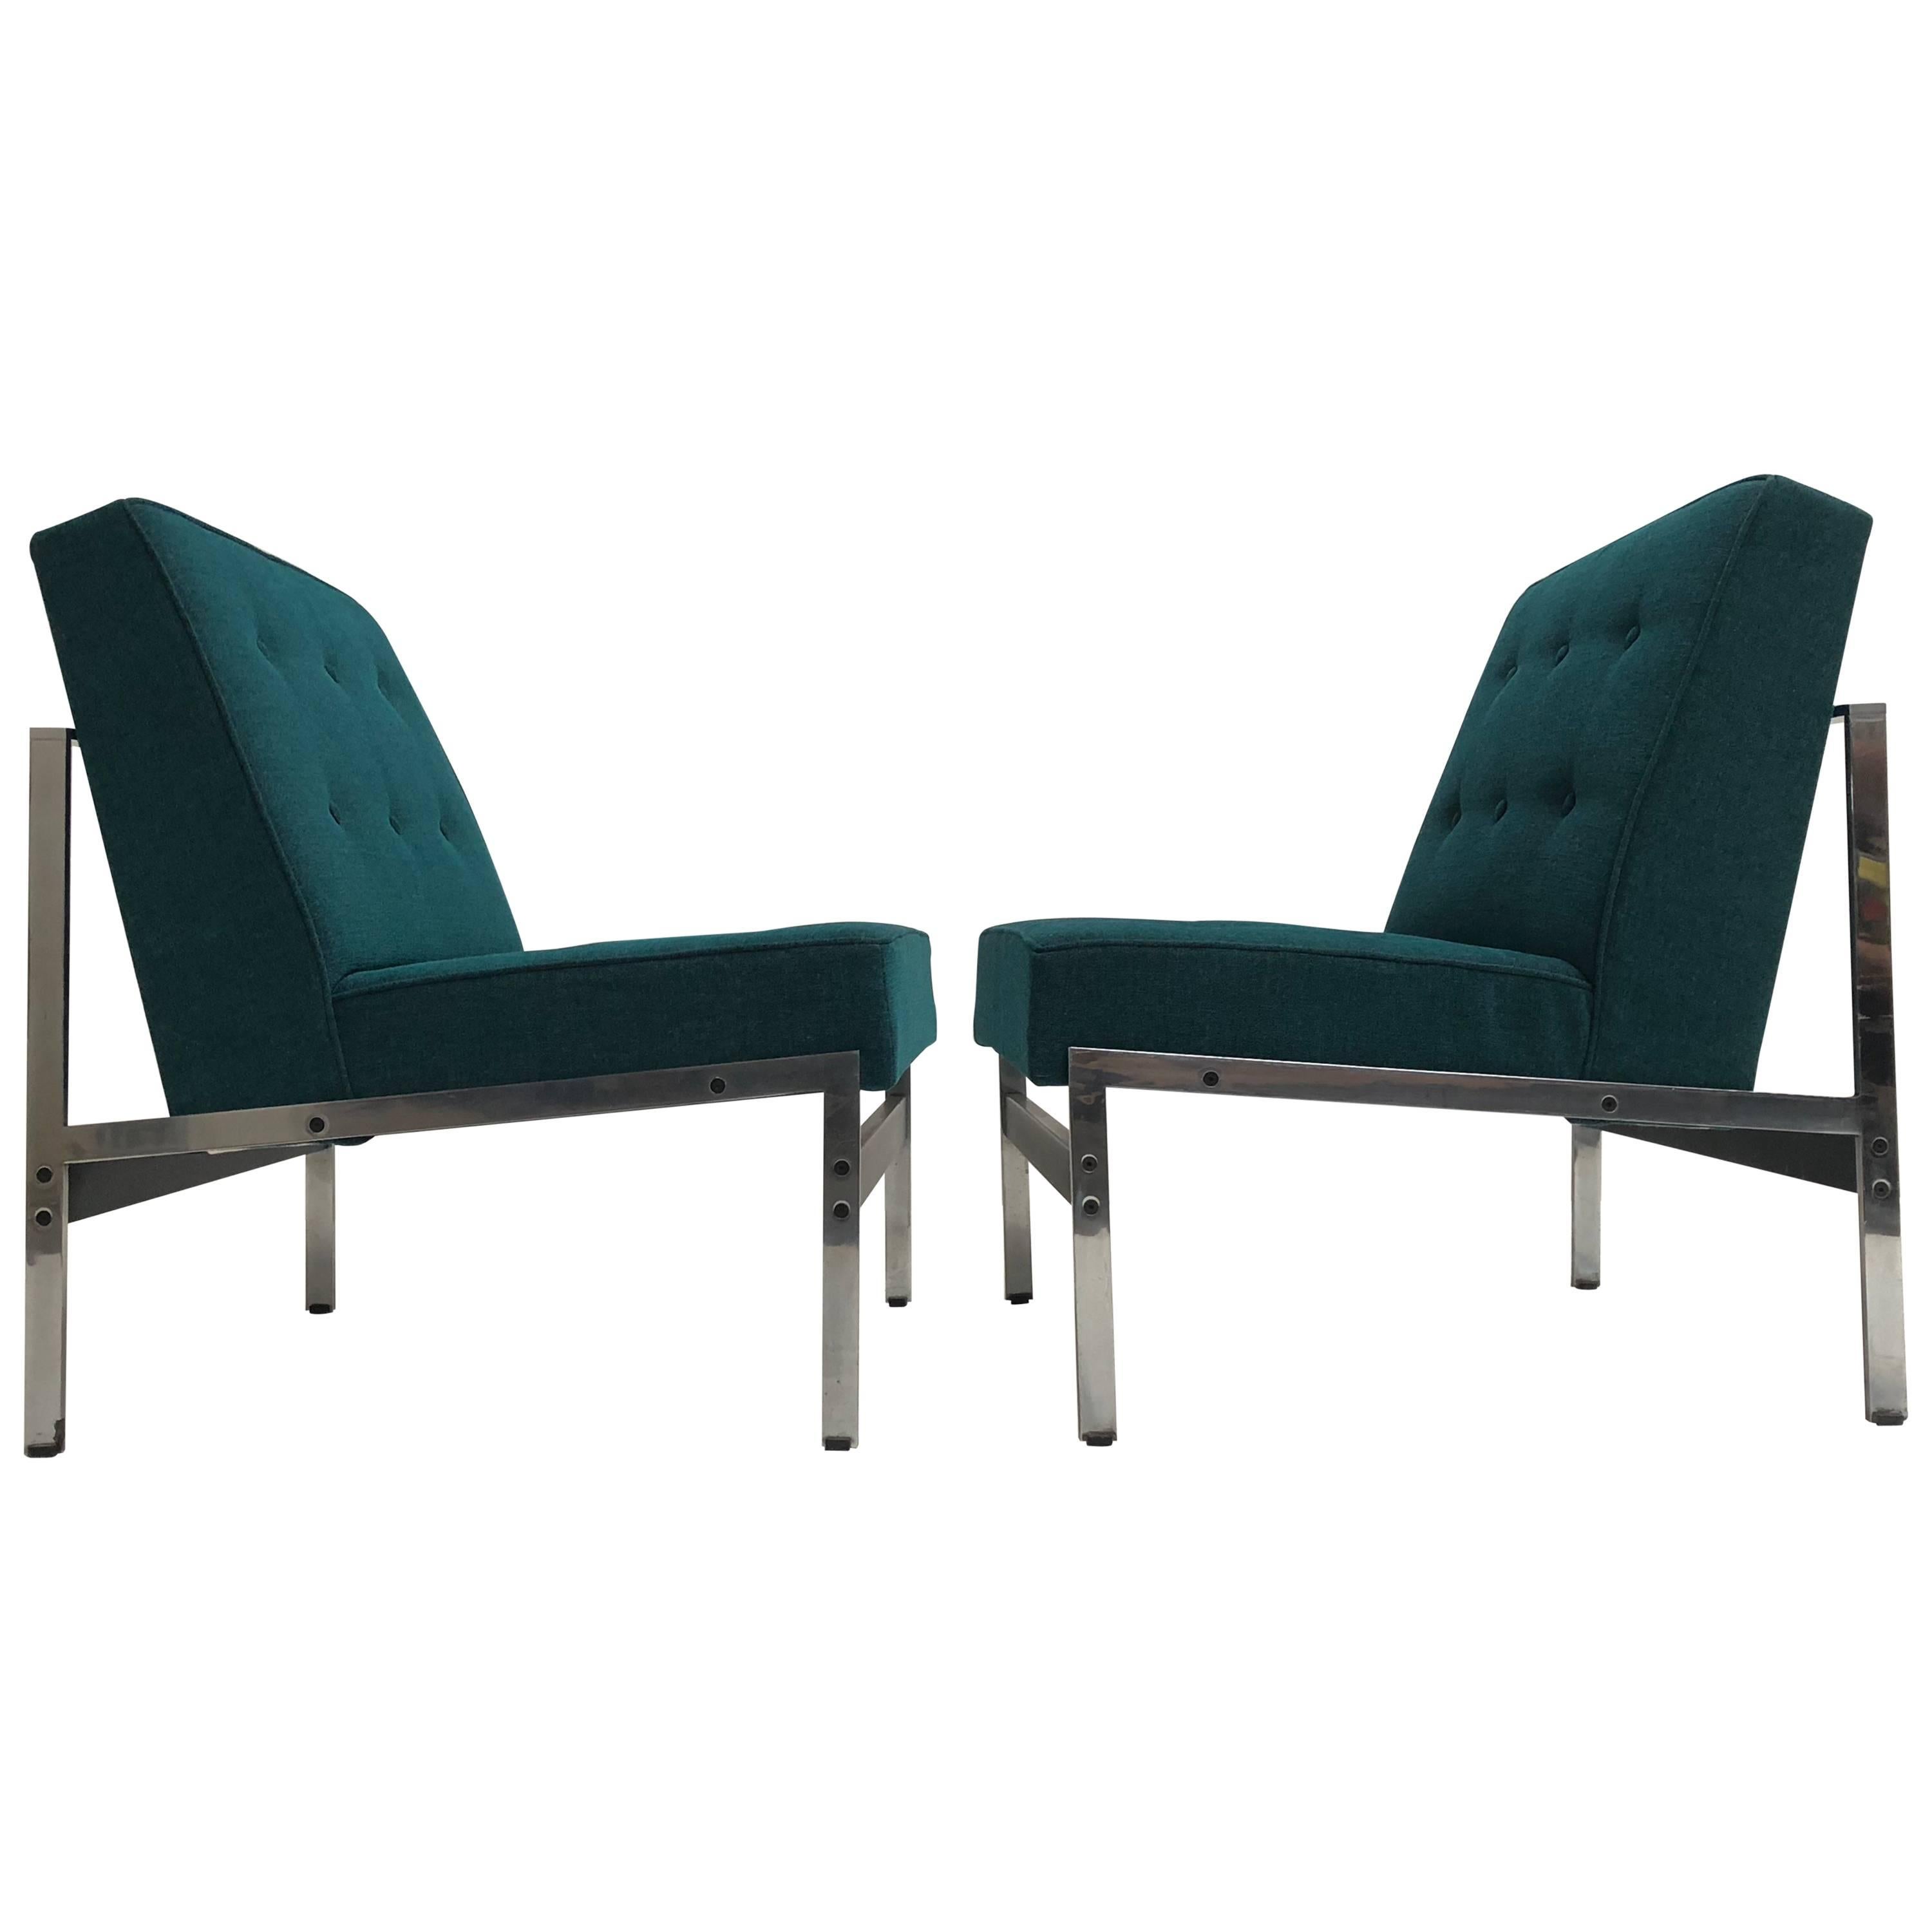 Rare Pair of 020 Lounge Chairs, Kho Liang Ie for Artifort the Netherlands, 1958